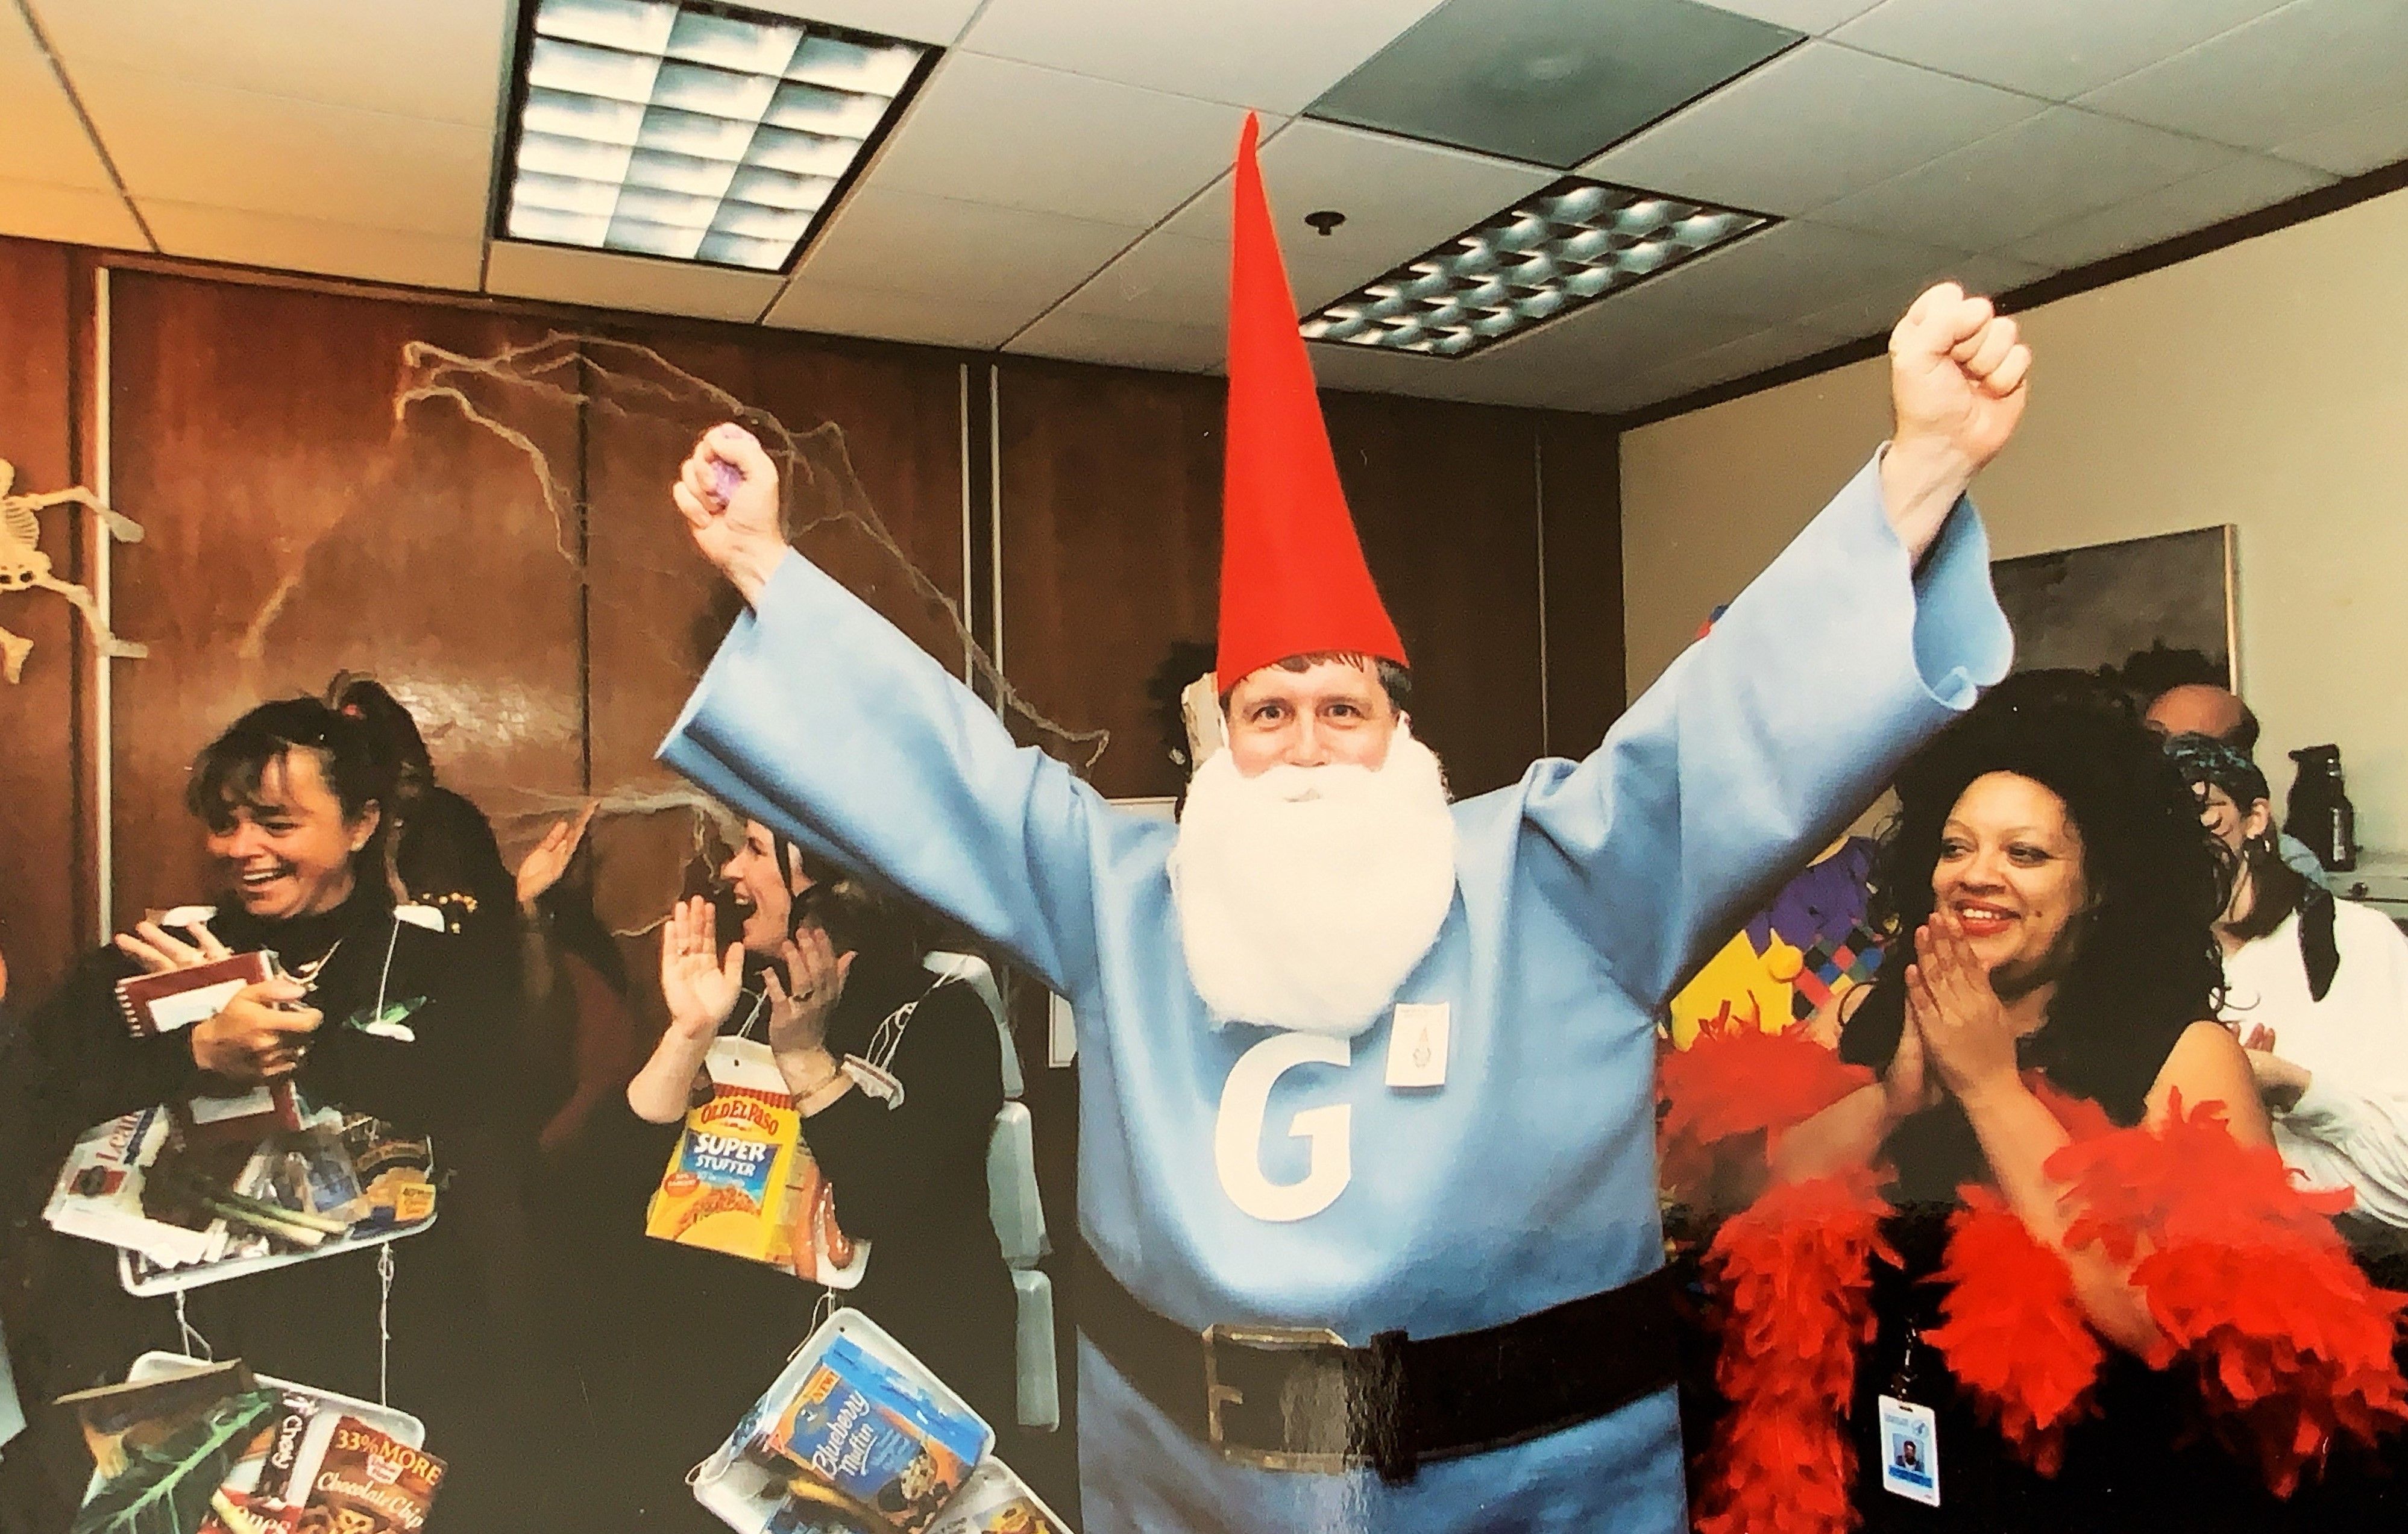 Bill hall in a G-nome costume